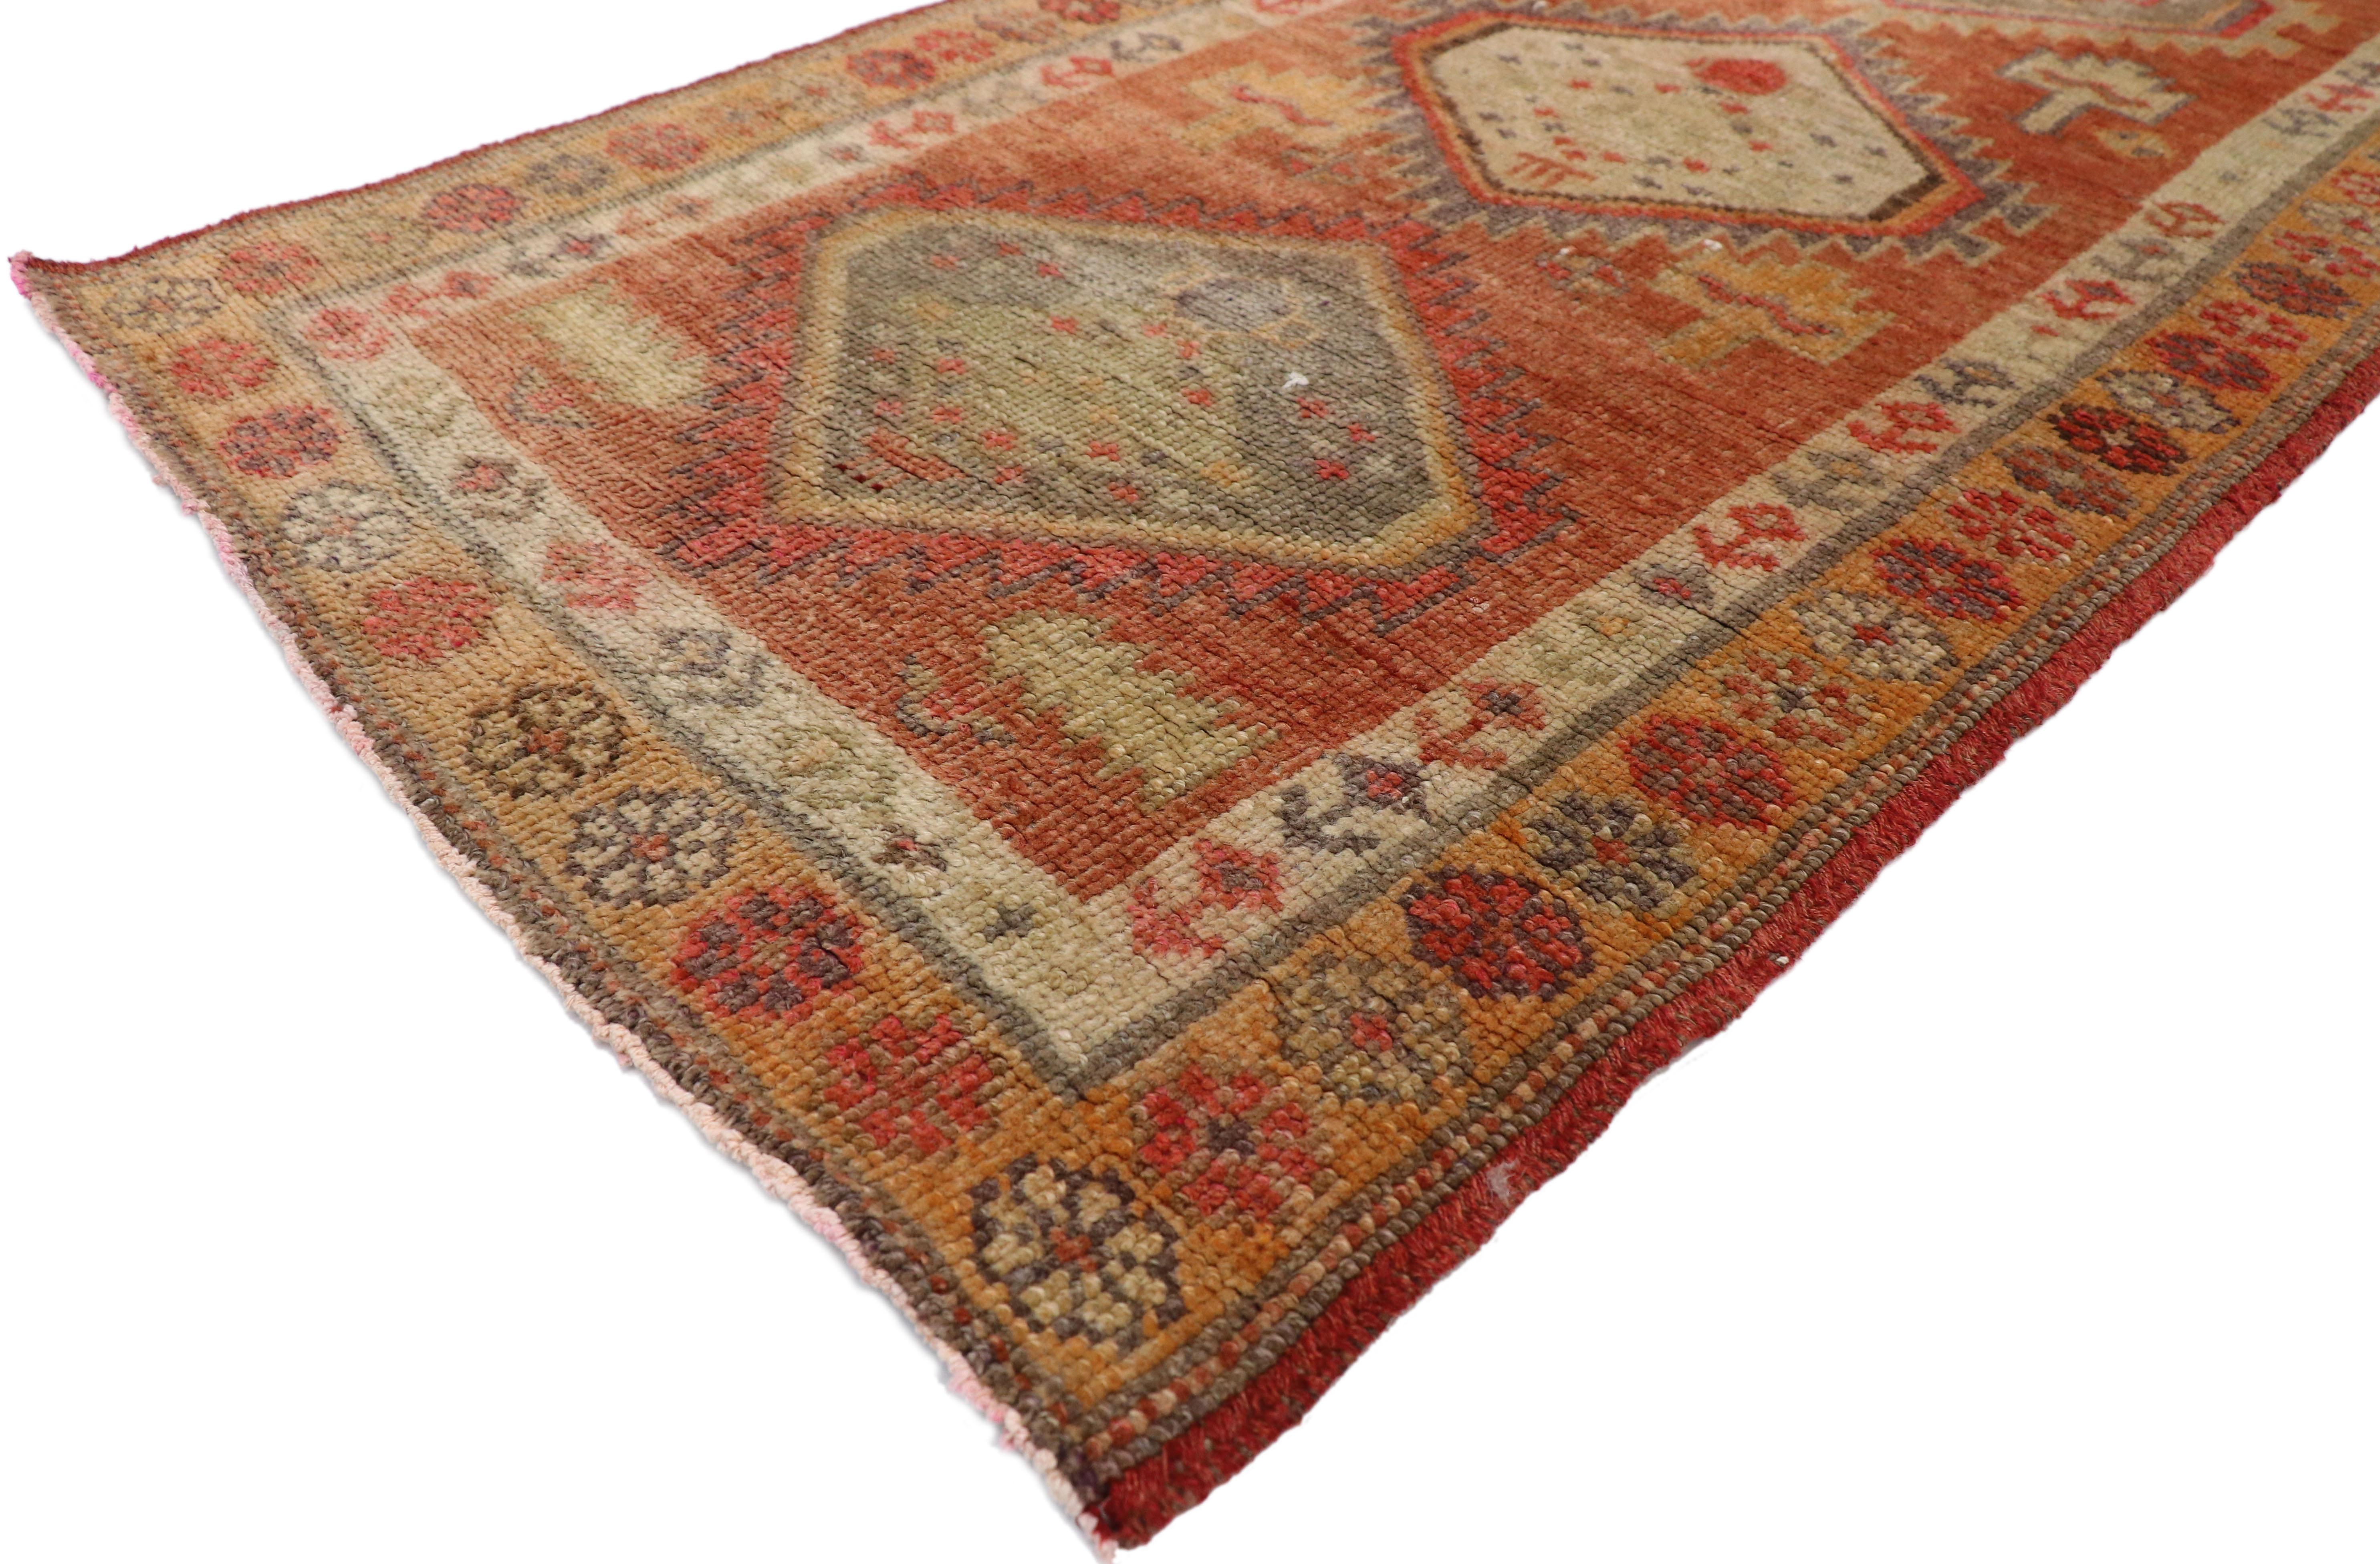 51665 Vintage Turkish Oushak Runner with Modern Northwest Style 02'07 x 11'01.  With its bold elemental nature combined with neutral tones and bright color pop, this hand-knotted wool vintage Turkish Oushak runner embodies a modern northwest style.